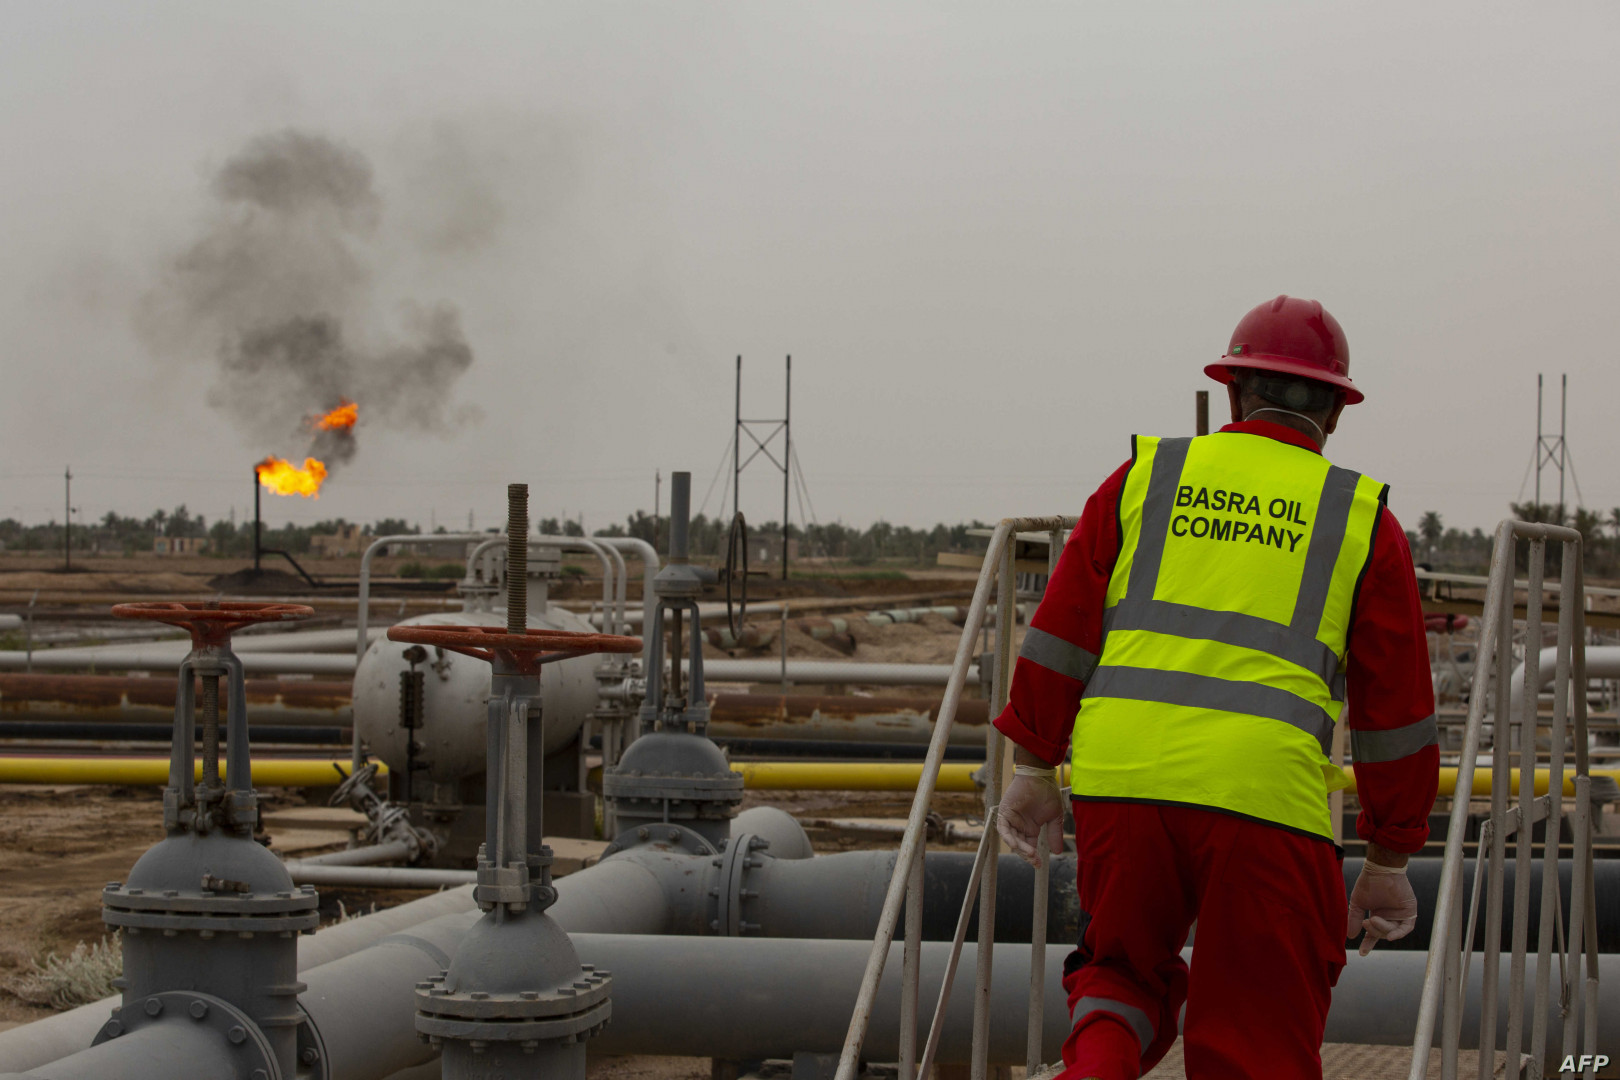 Japex to more than double crude sales in FY 2022-23 on higher Iraq, US oil